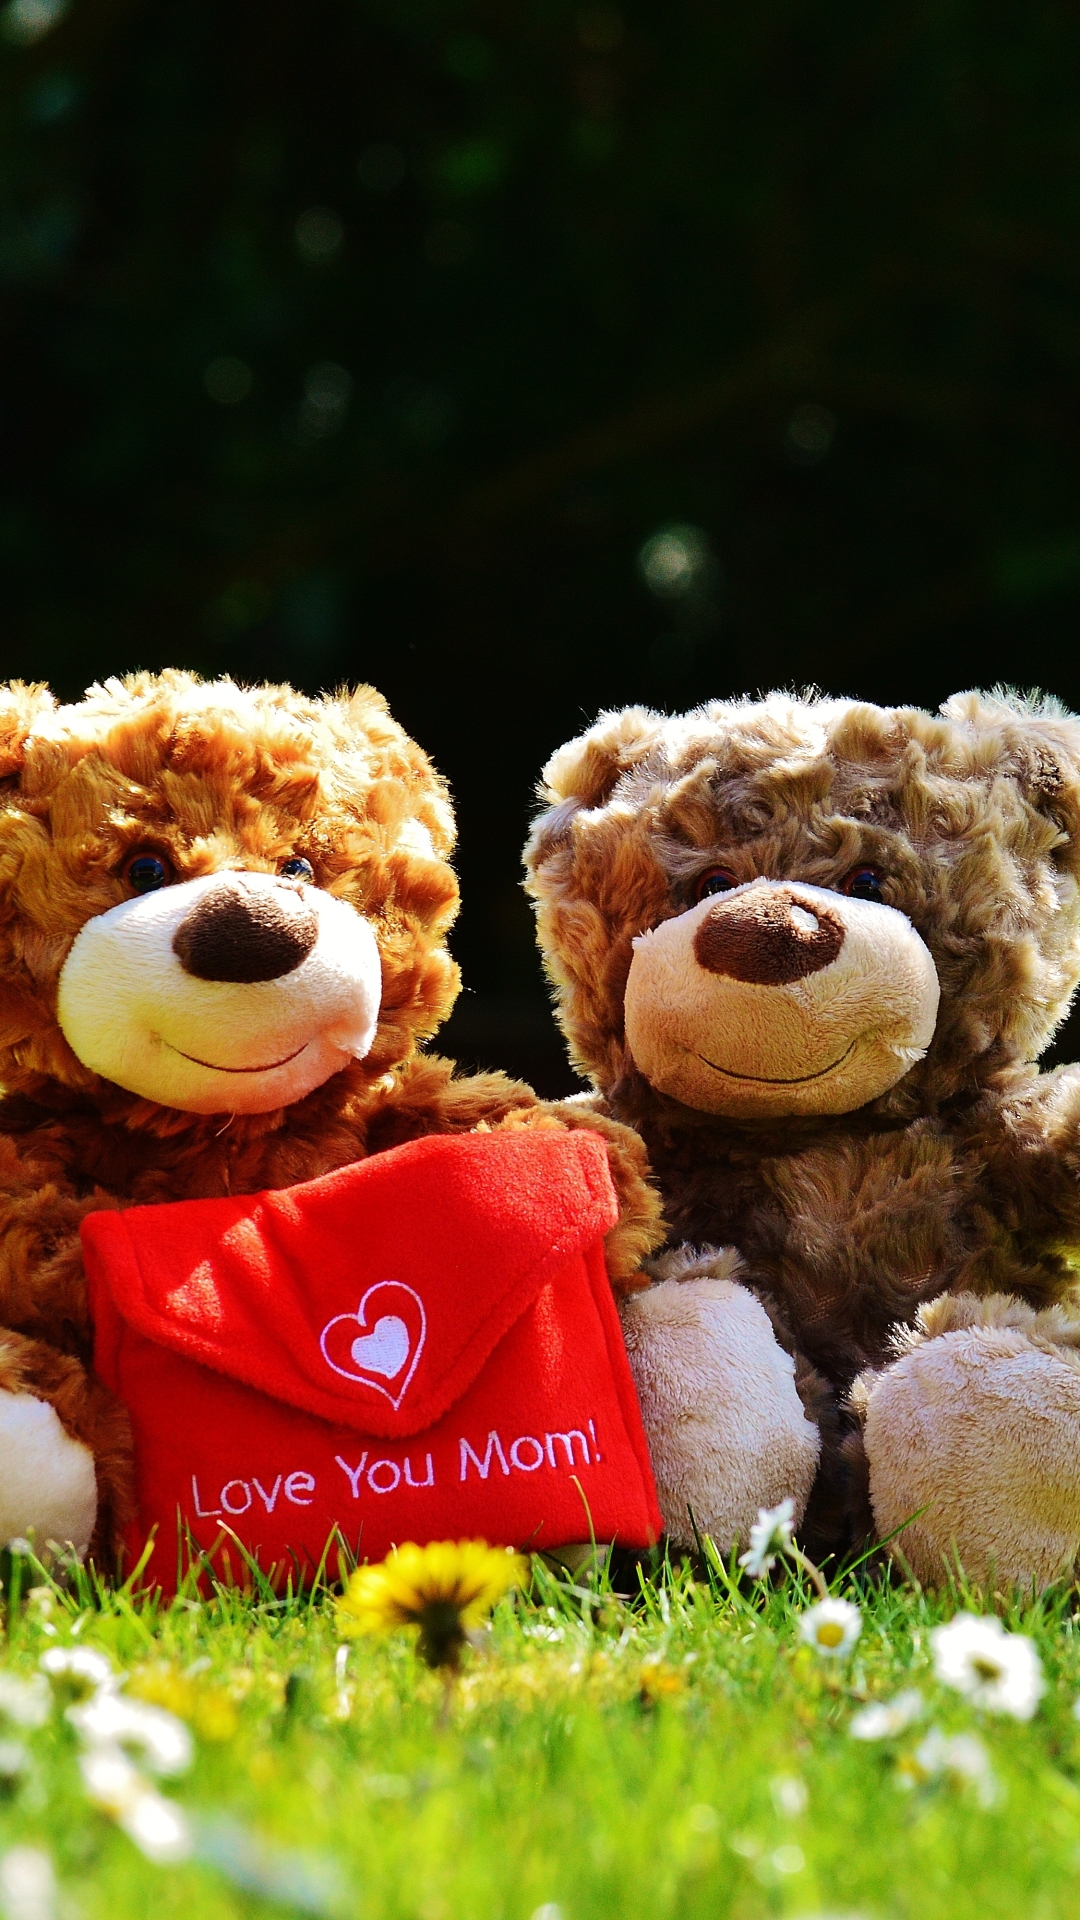 Mobile wallpaper: Love, Teddy Bear, Holiday, Toy, Stuffed Animal, Mother's  Day, 1296295 download the picture for free.